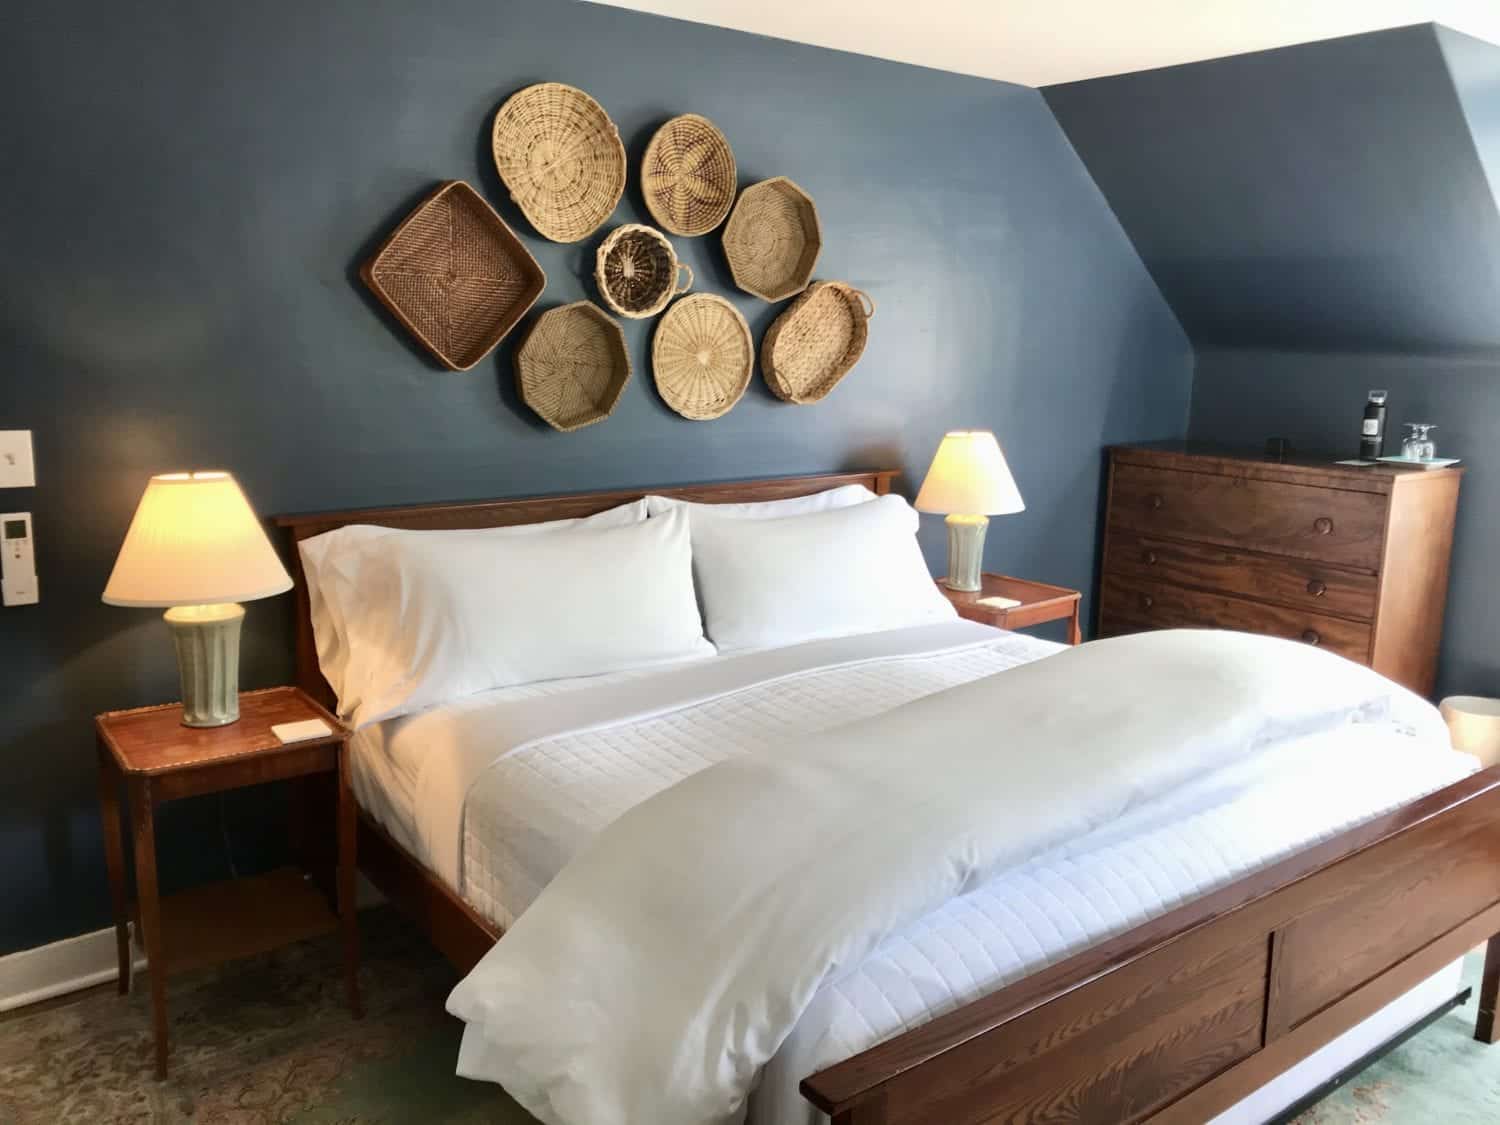 1824 House Inn + Barn - King Bed with Baskets on Wall